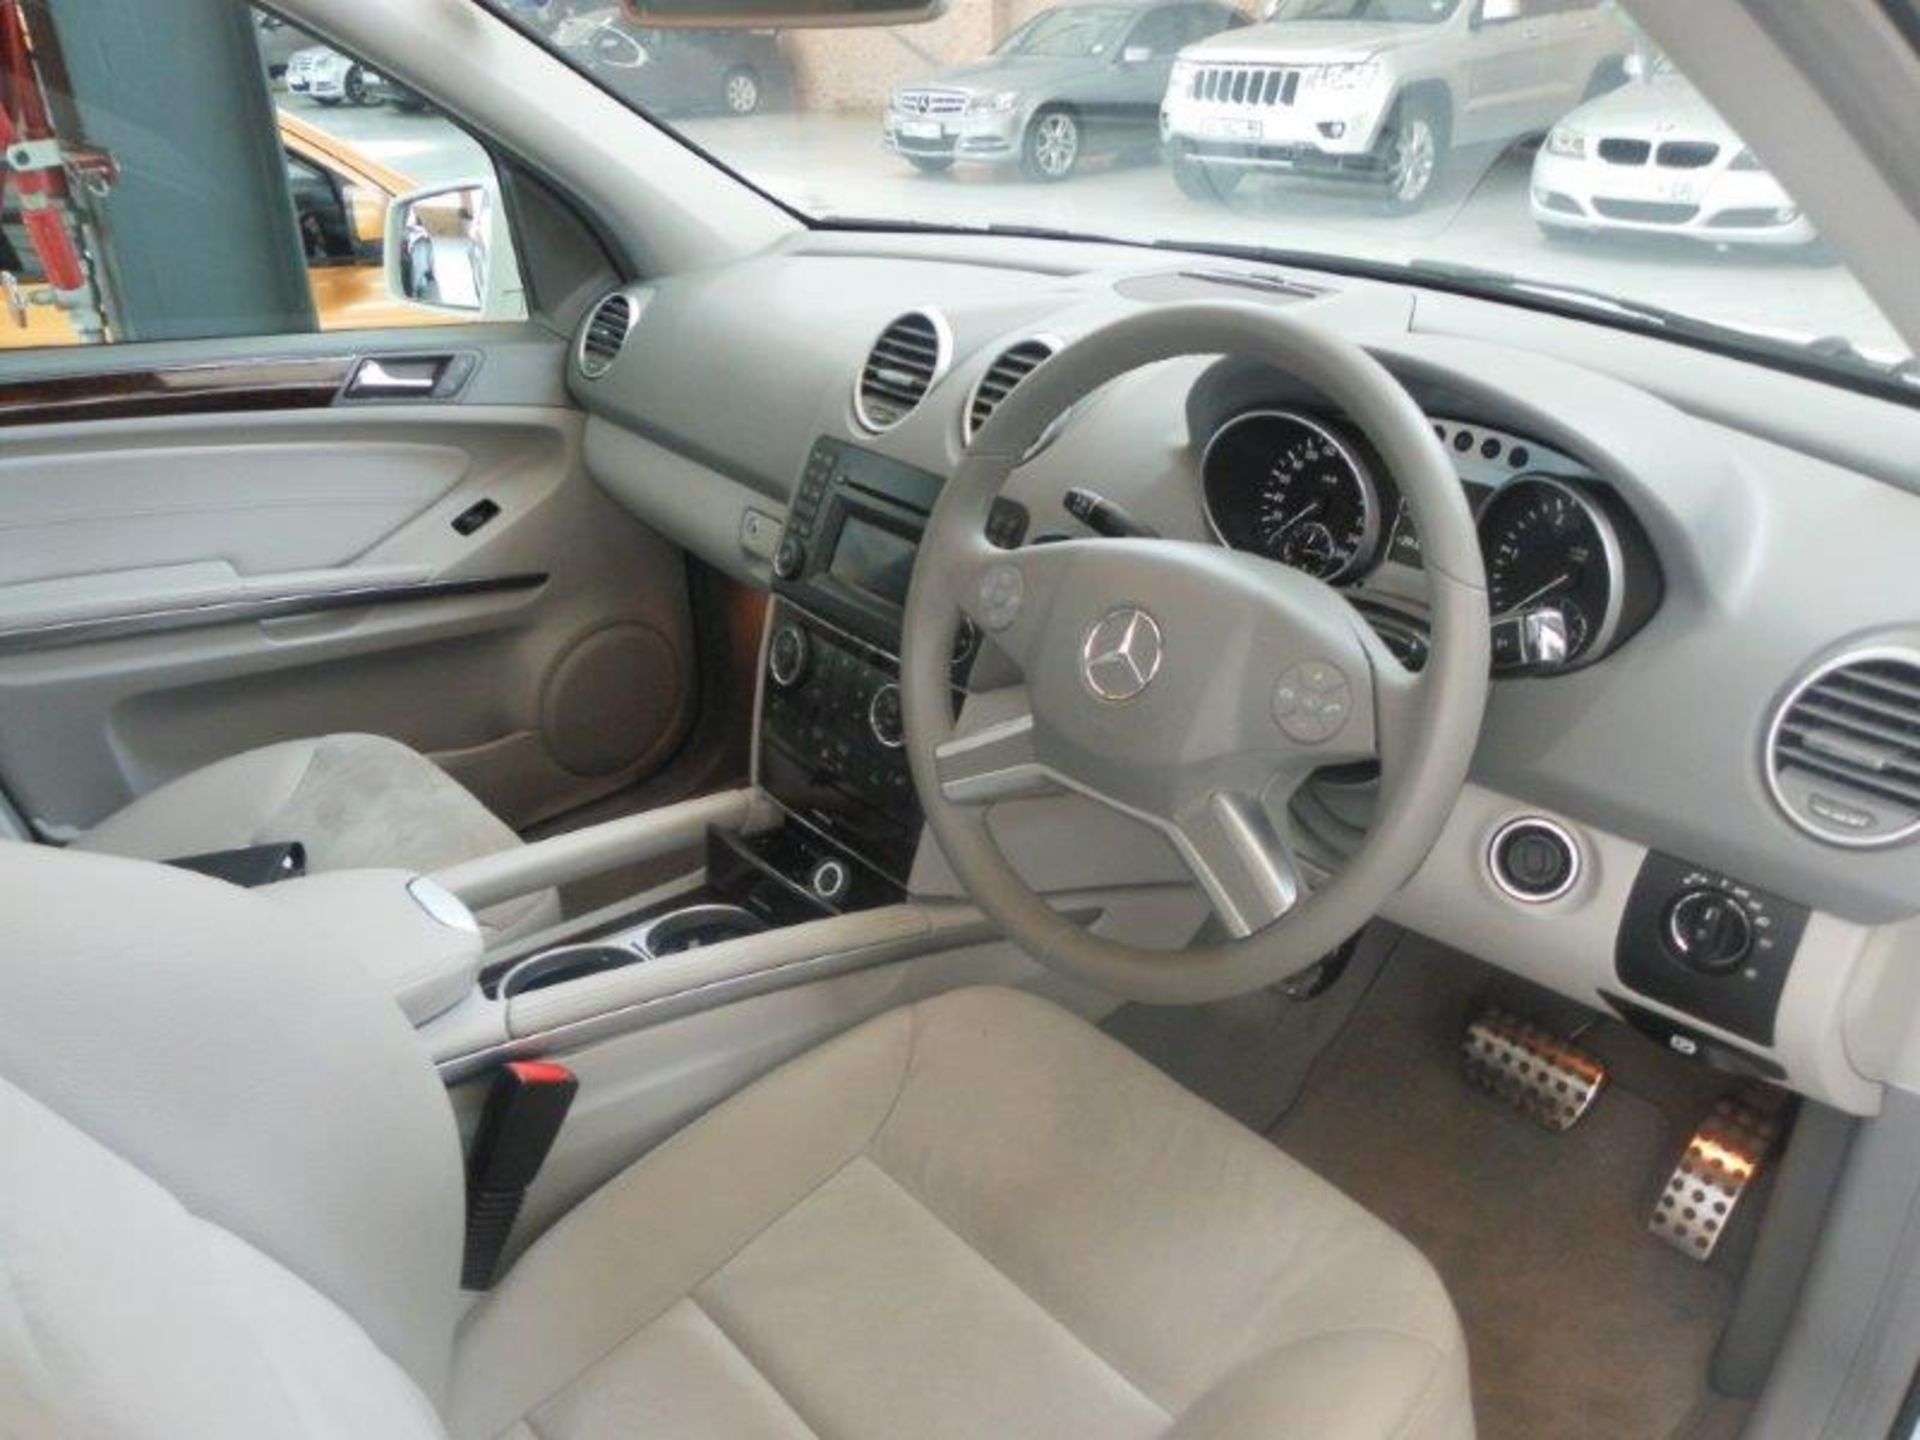 2011 MADOSINFS Mercedes-Benz ML350 CDI 4Matic (Vin No: WDC1641222A656827 )(50023 kms) Suggested - Image 5 of 5